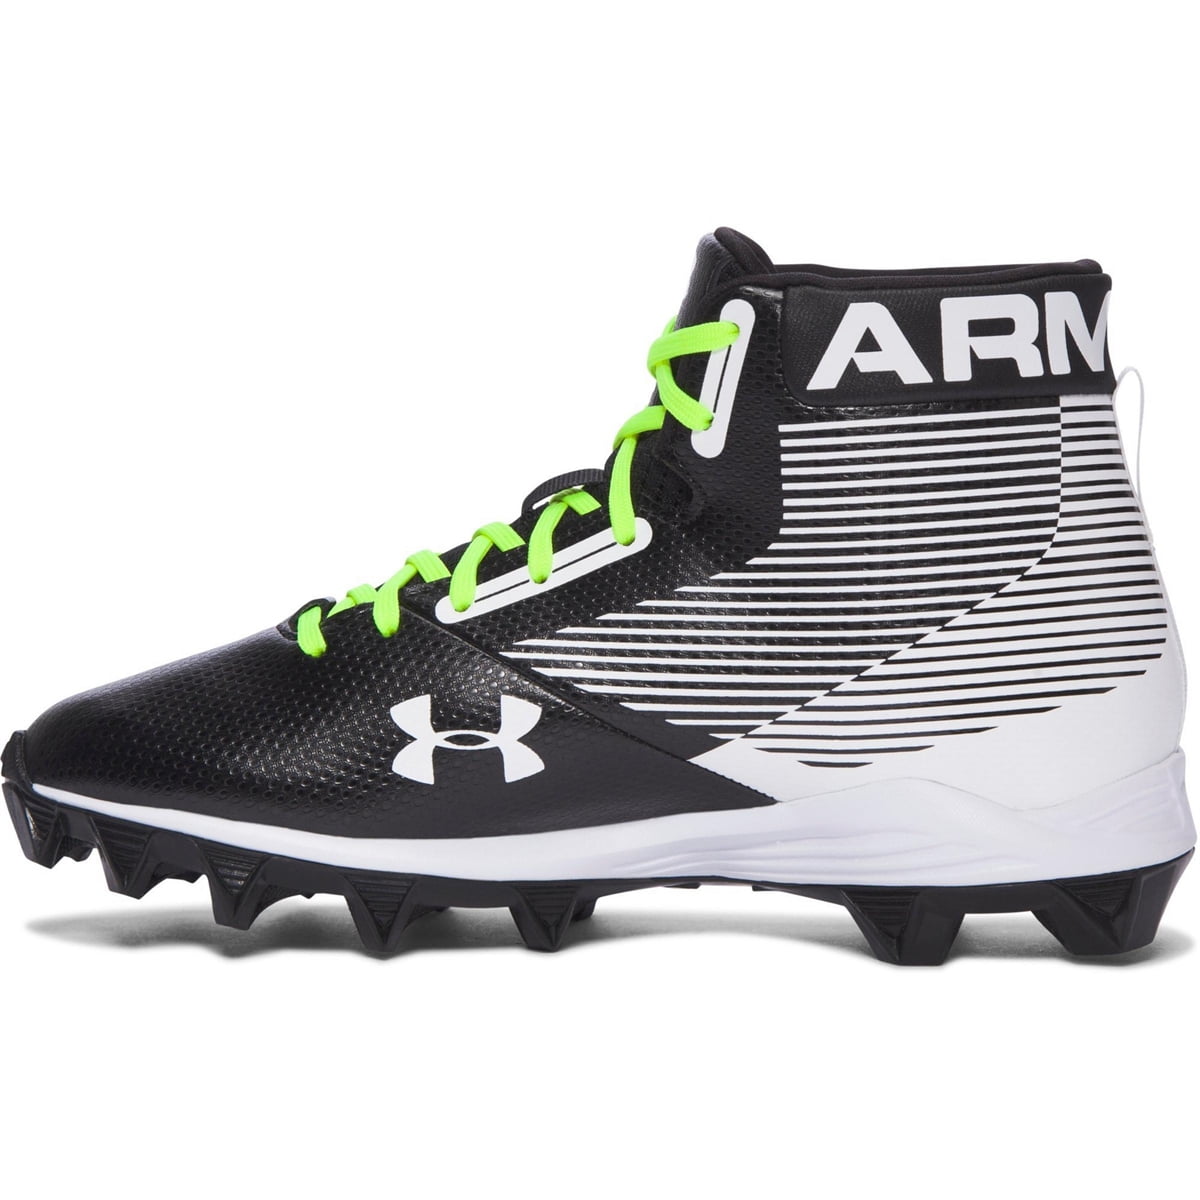 2019 Under Armour Youth Boys Hammer WIDE WIDTH Football Lacrosse Cleats Shoes